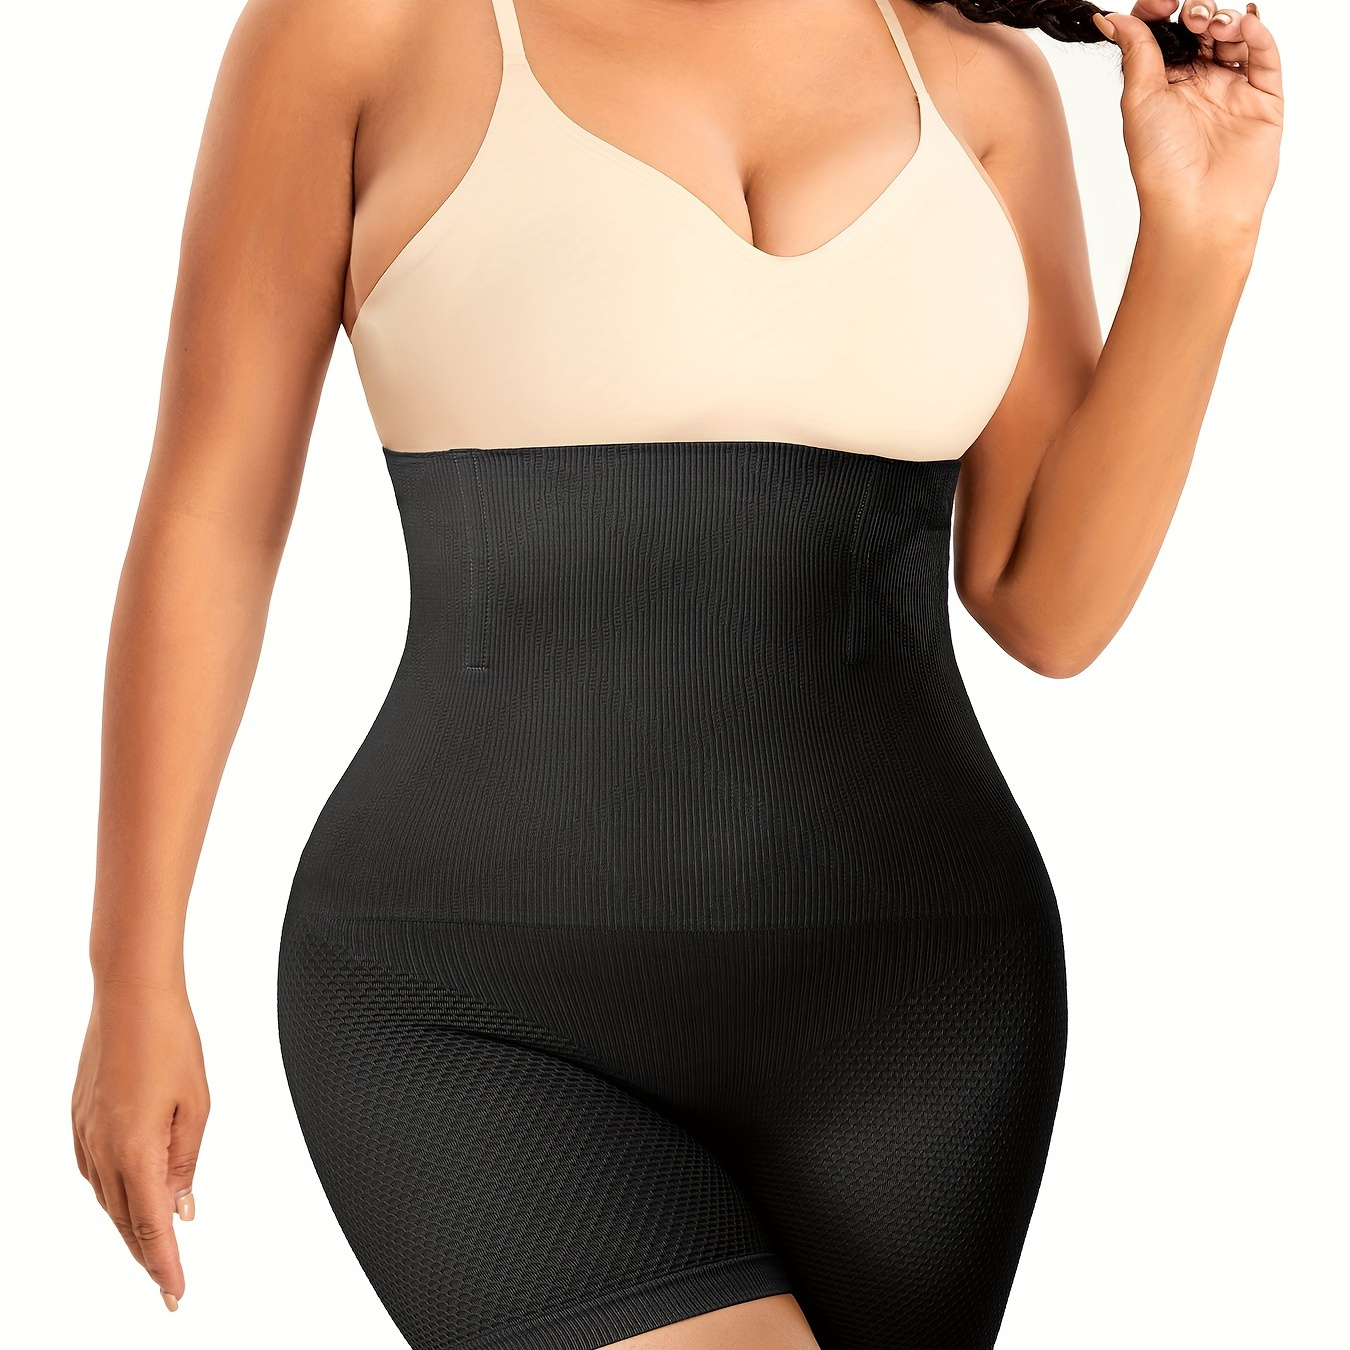 

Plus Size Simple Panty, Women's Plus Solid High Rise Tummy Control Seamless Slimming Shapewear Shorts